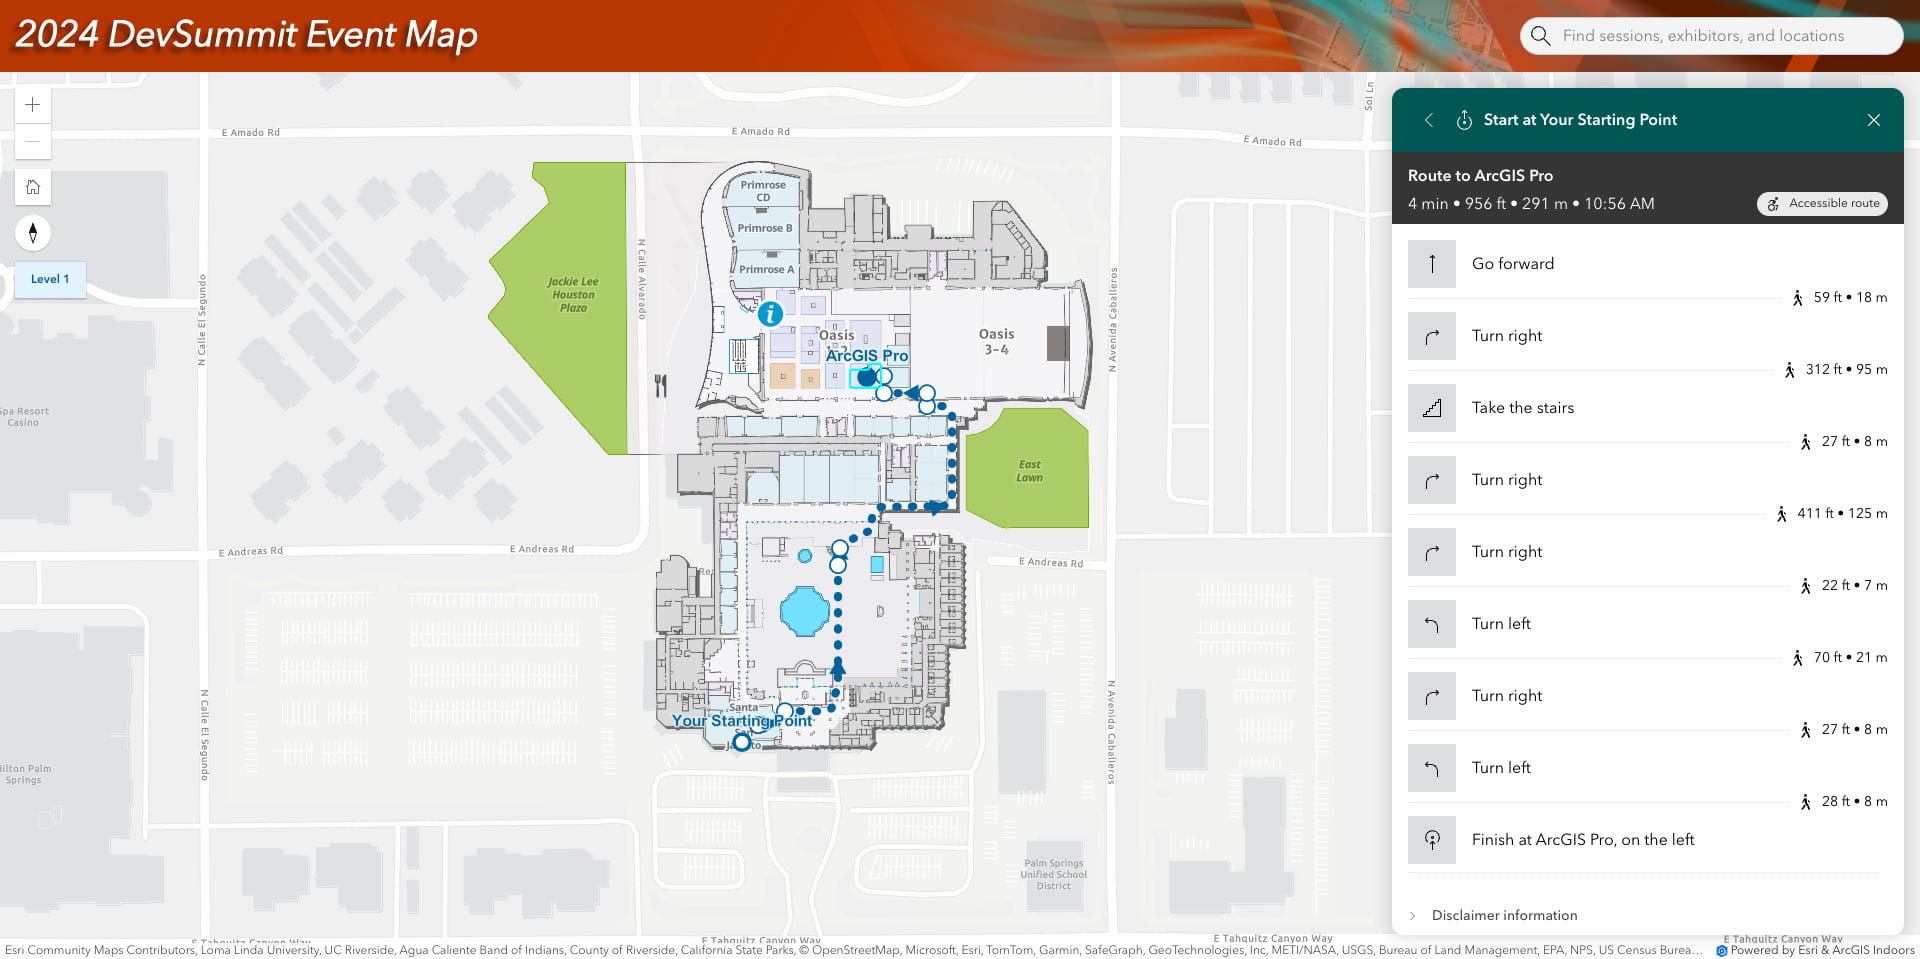 A web map with the conference building layout.